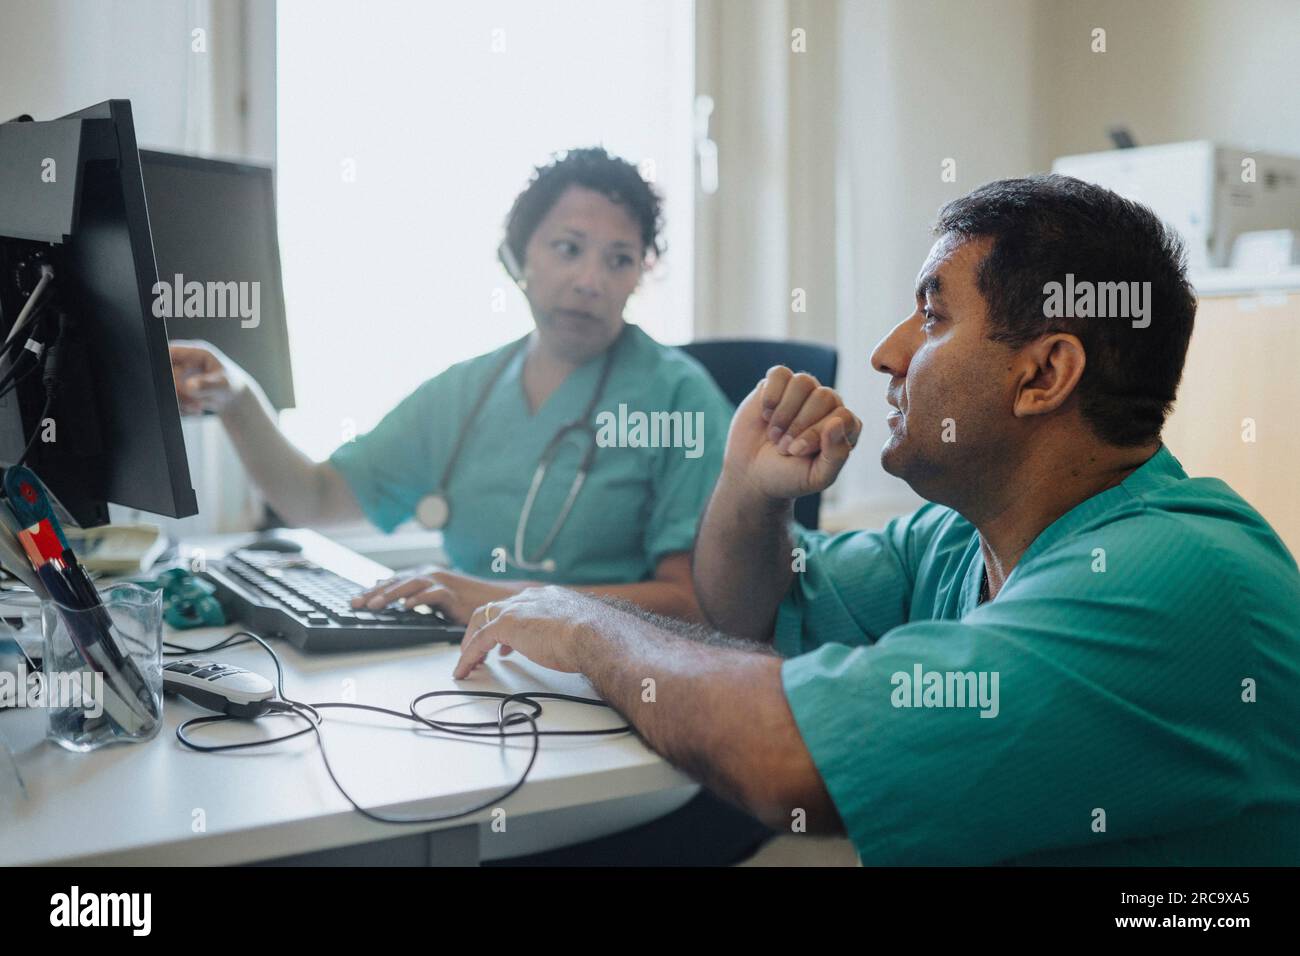 Male and female doctors discussing over computer at desk in hospital Stock Photo